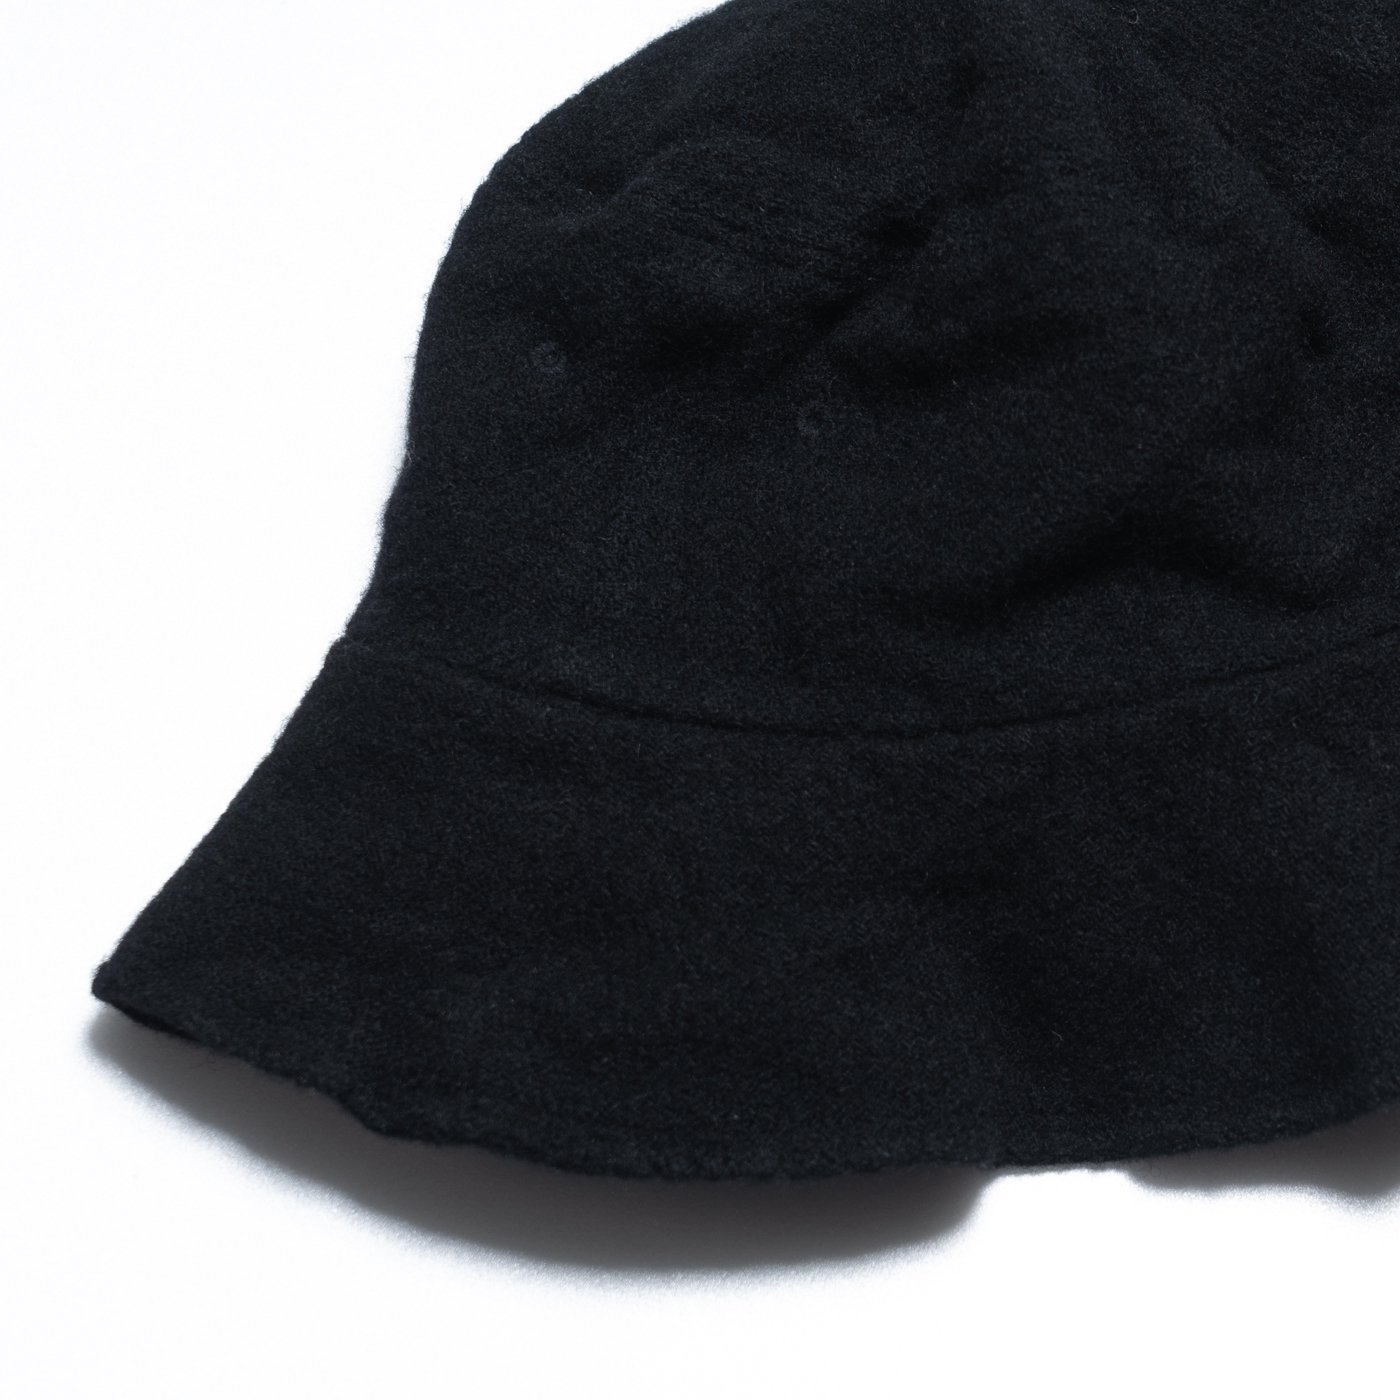 COMME des GARCONS SHIRT * 23AW Collection Wool Nylon Hat(2Ÿ)